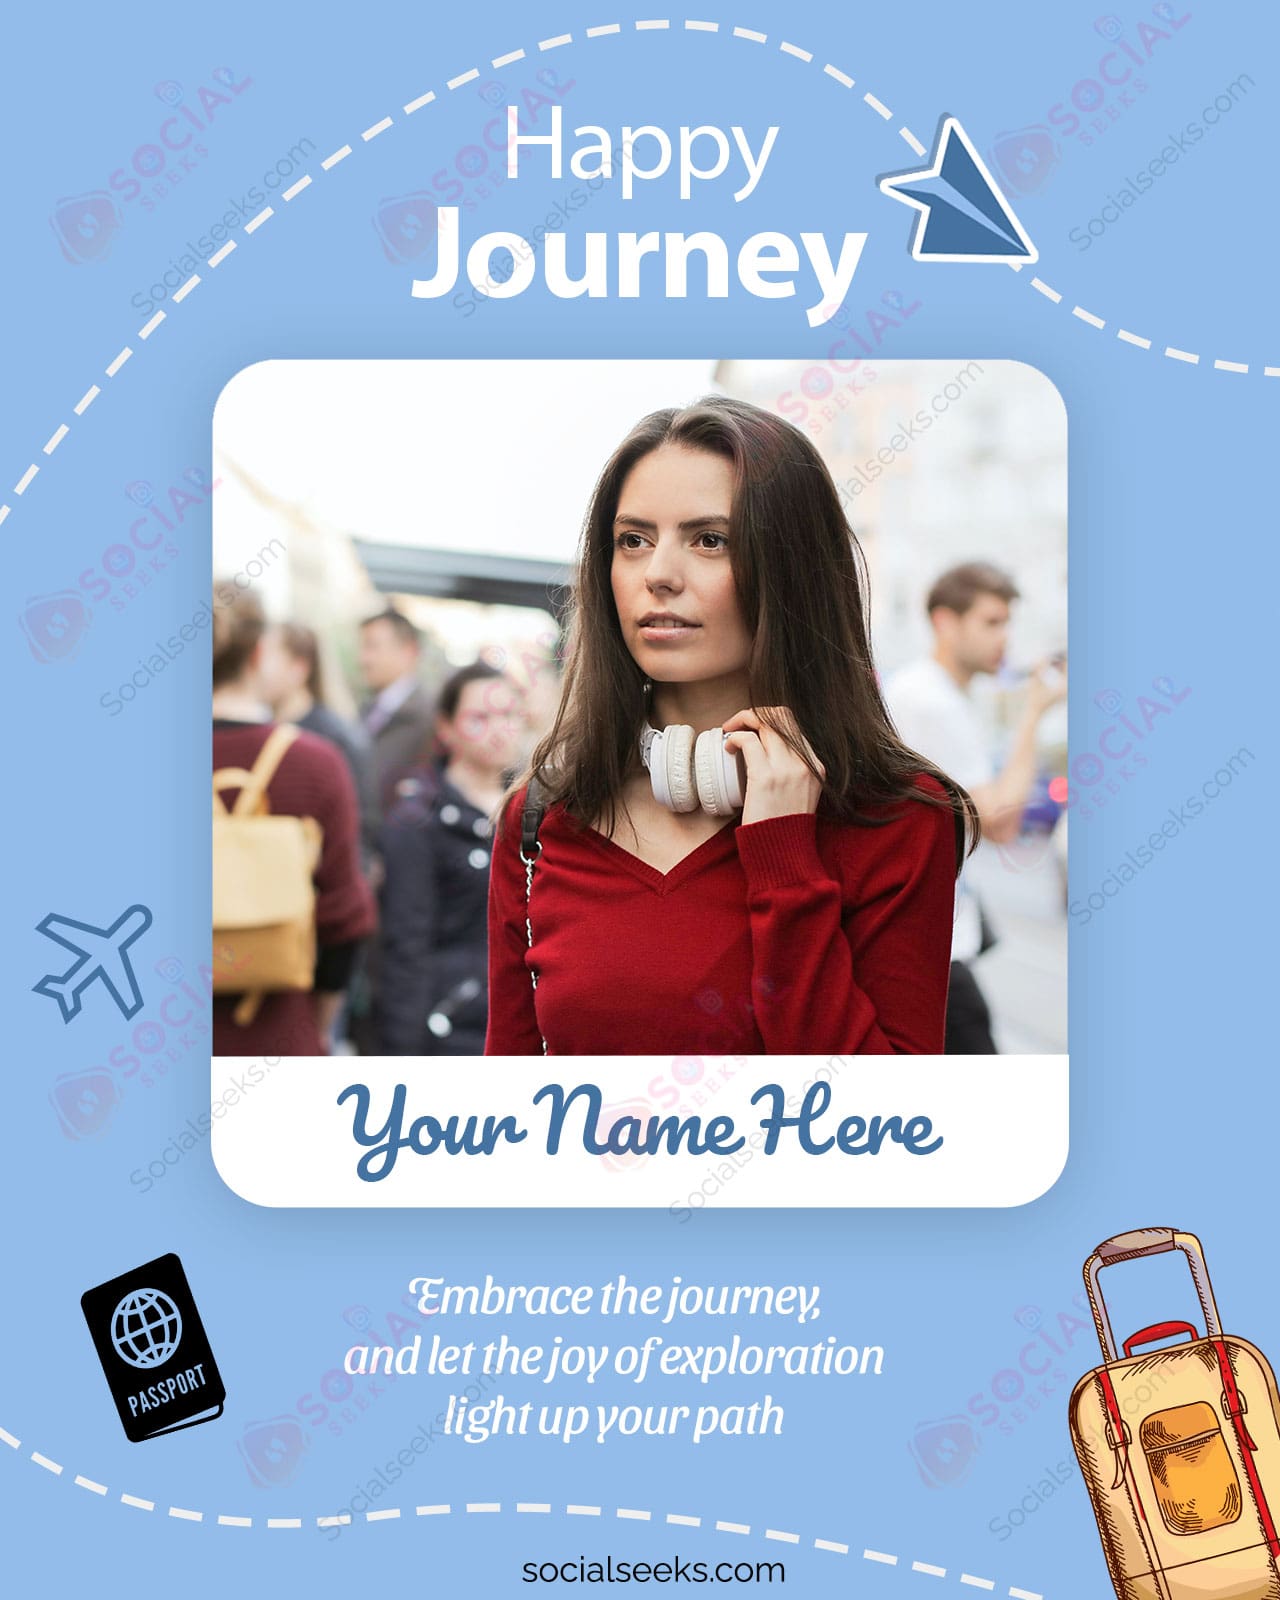 Happy Journey Bon Voyage Wishes Greeting Cards With Photo and Name